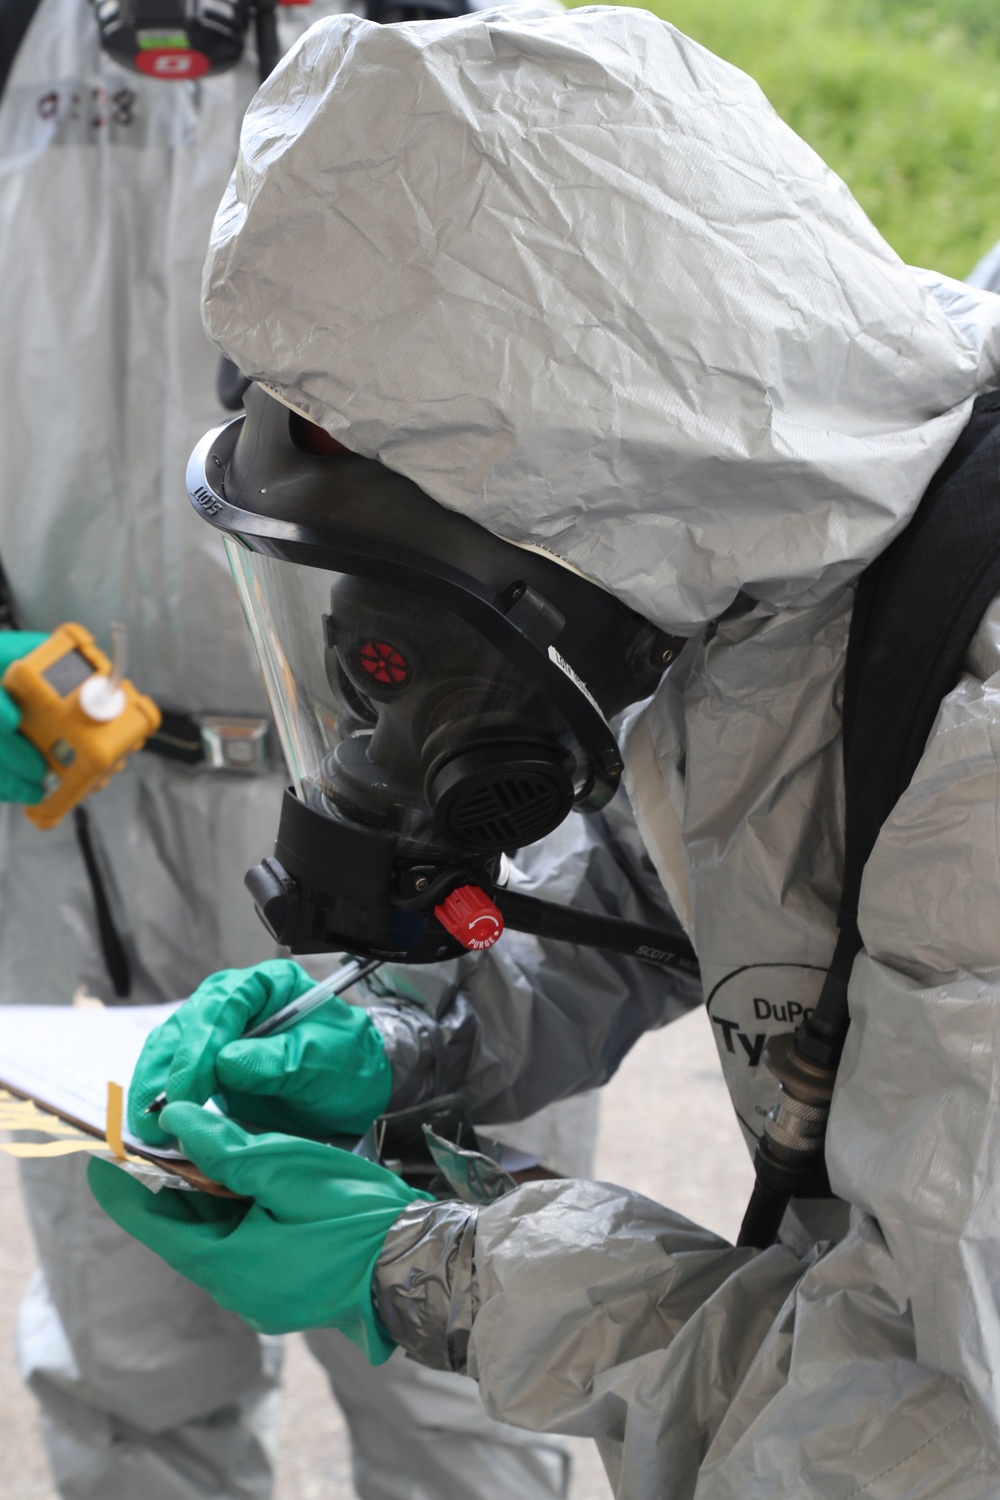 Service members and civilians learn to respond to hazardous materials